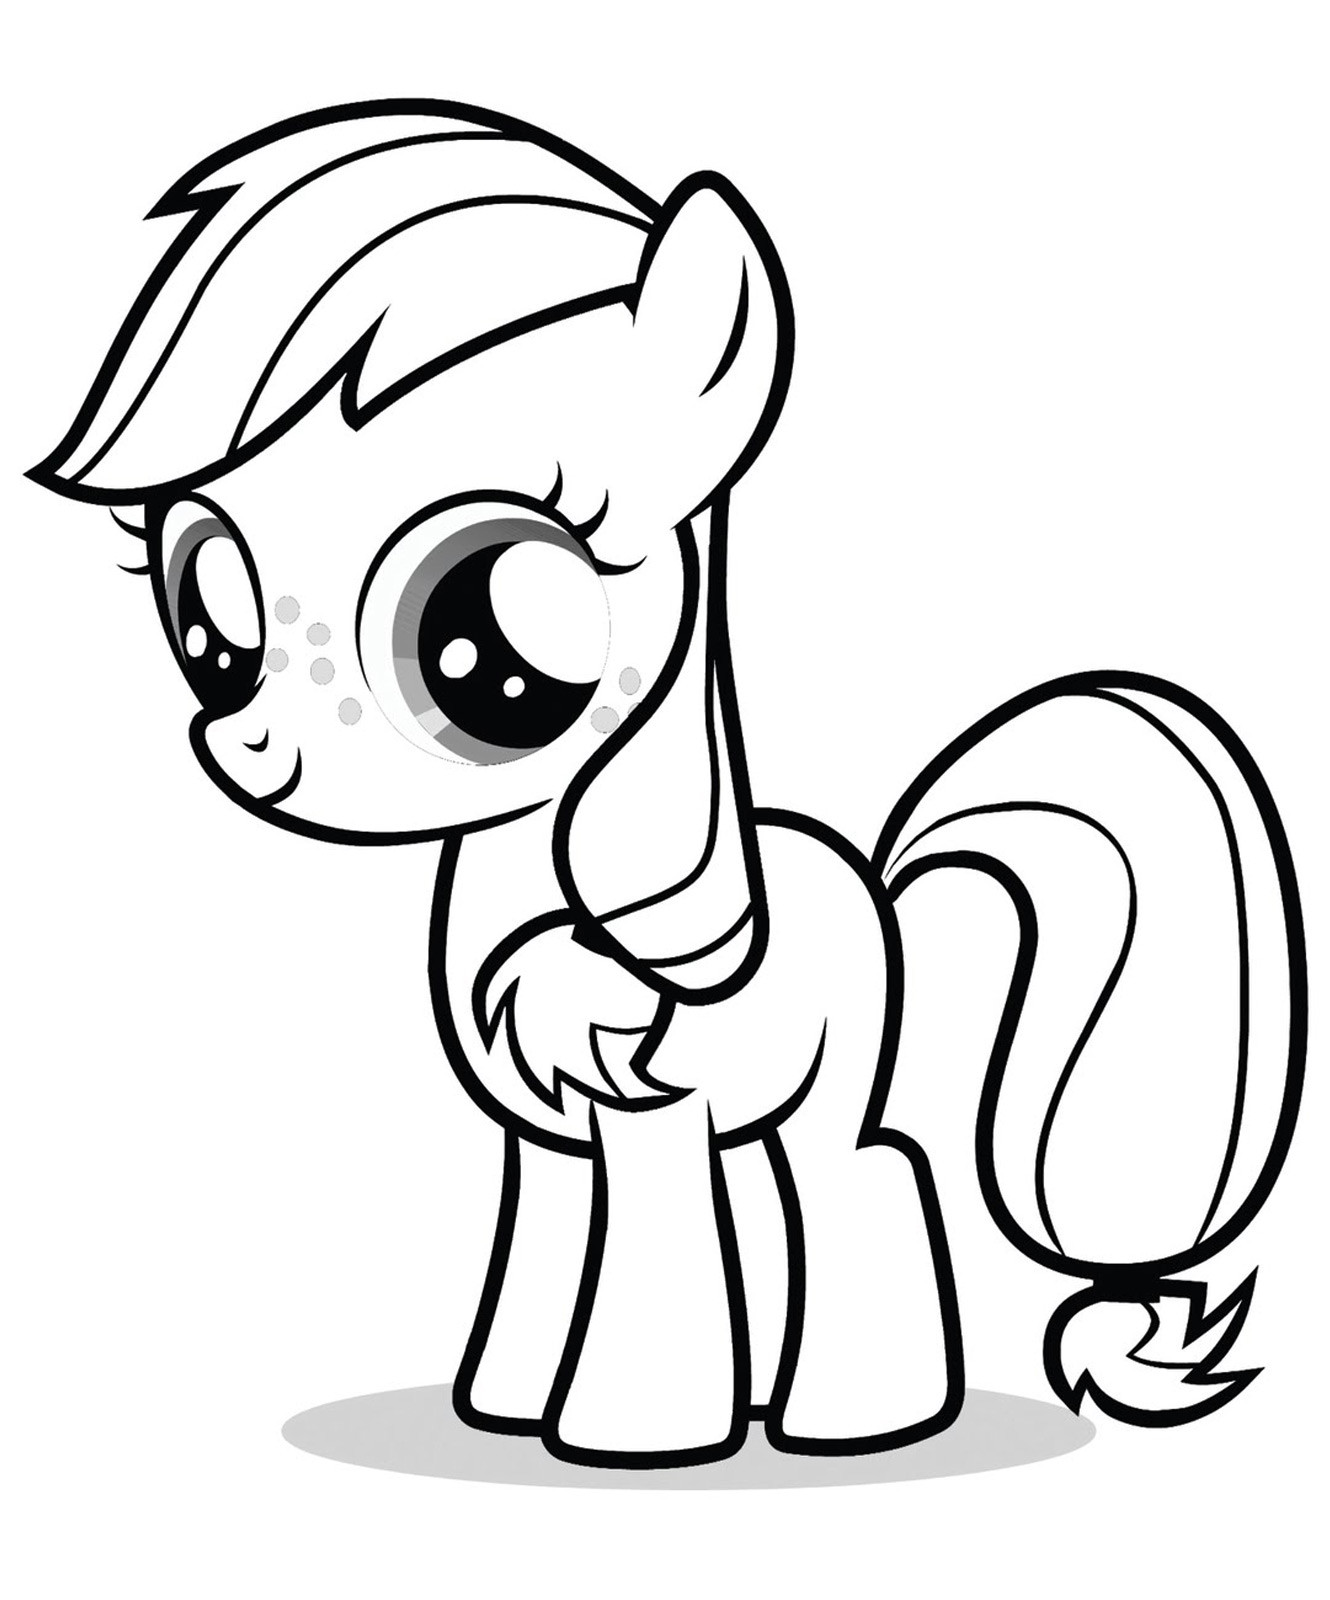 My Little Pony Free Coloring Pages For Girls
 Free Printable My Little Pony Coloring Pages For Kids